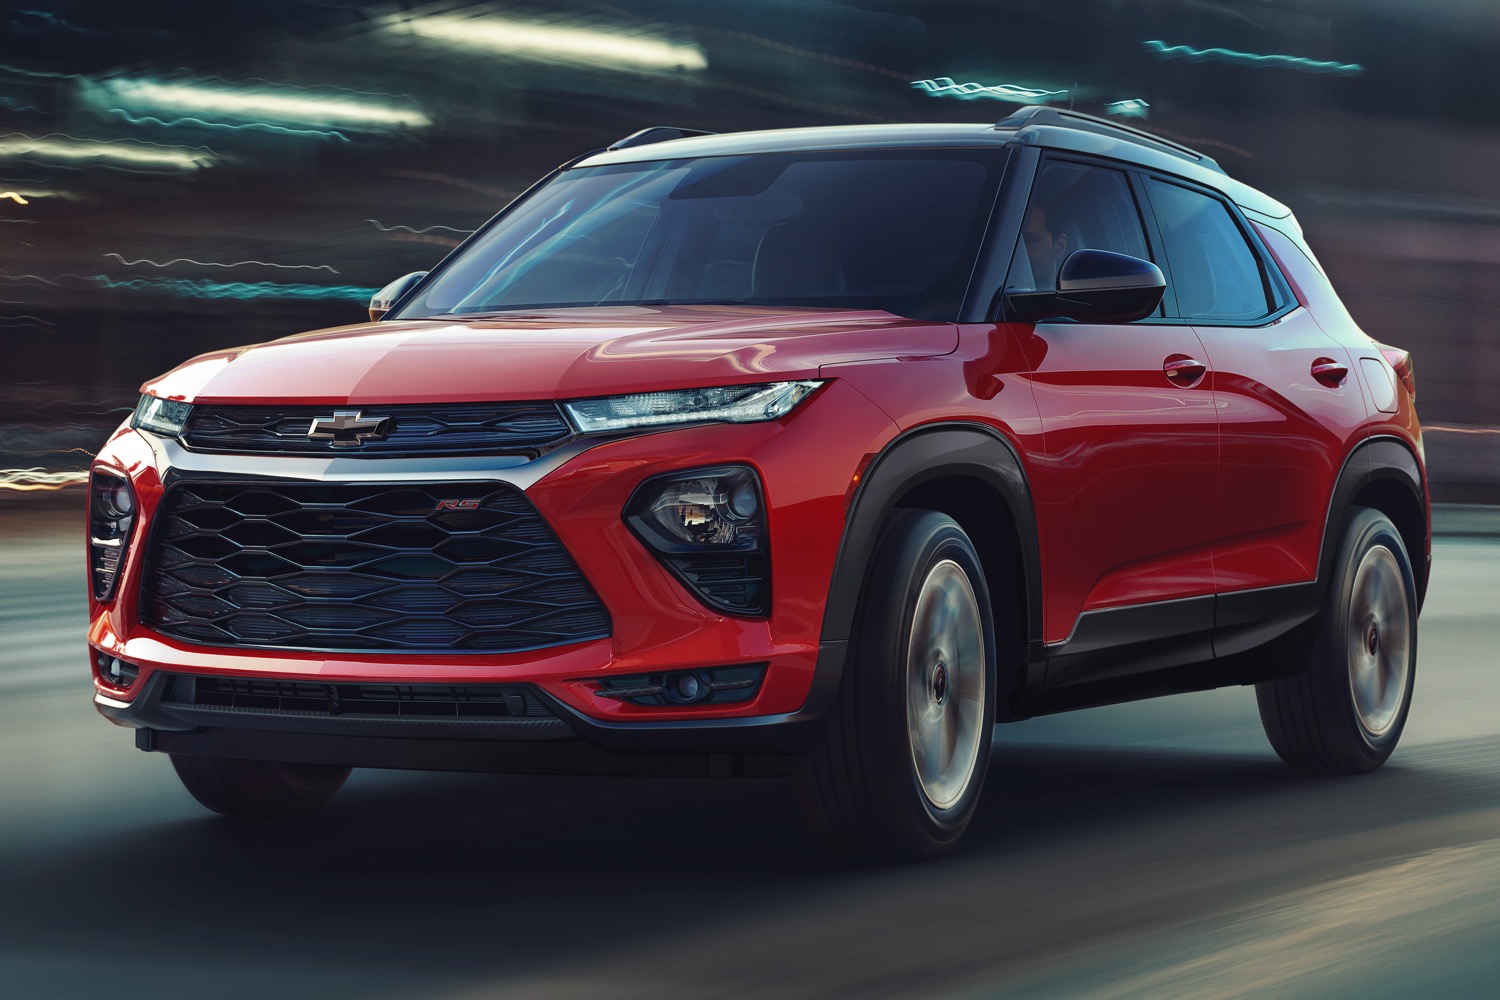 2022 Chevy Trailblazer New Mahogany Red Color First Look